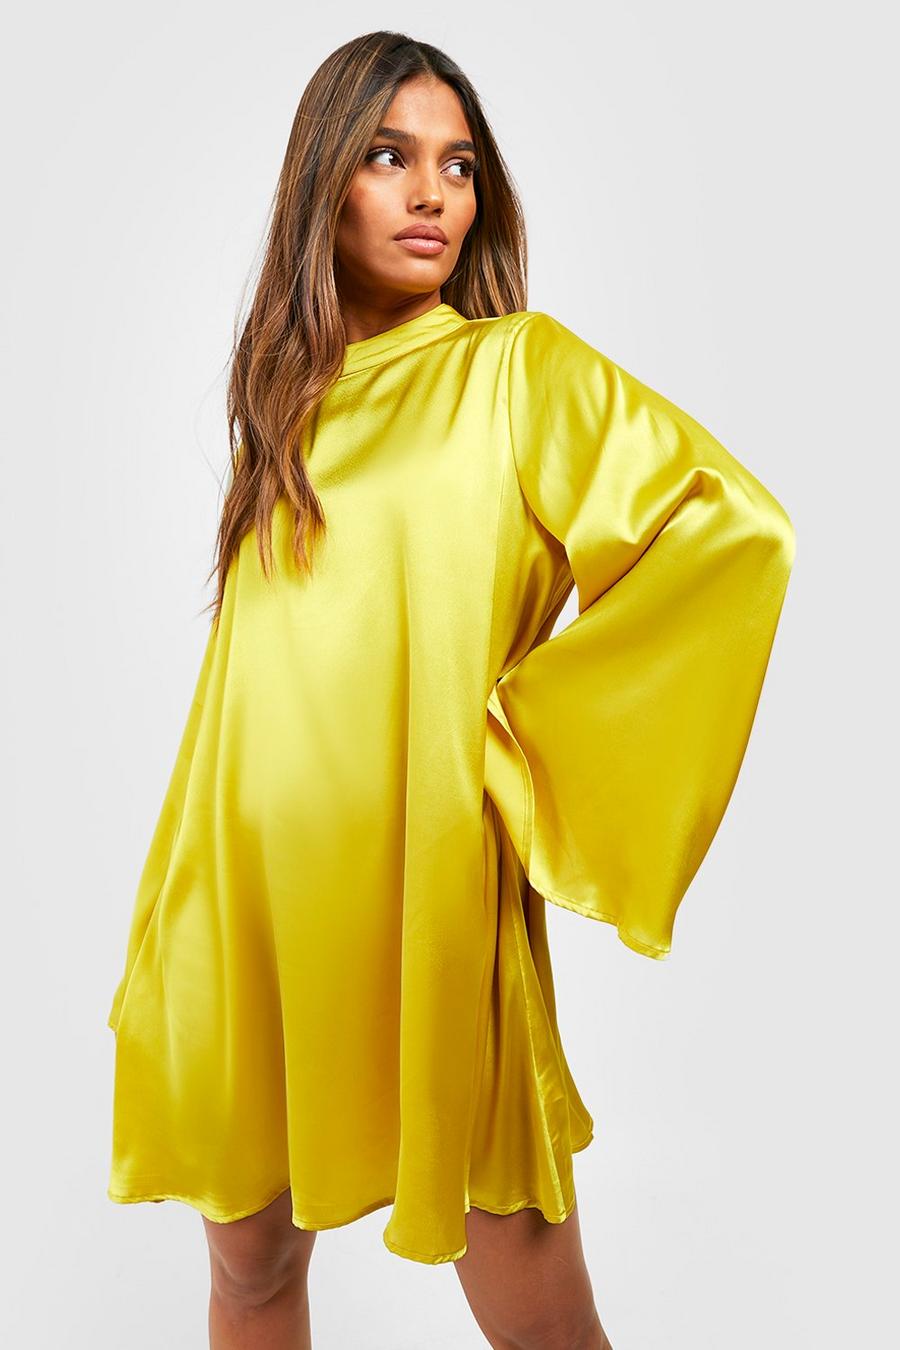 Chartreuse yellow The Satin Flare Sleeve Smock Dress